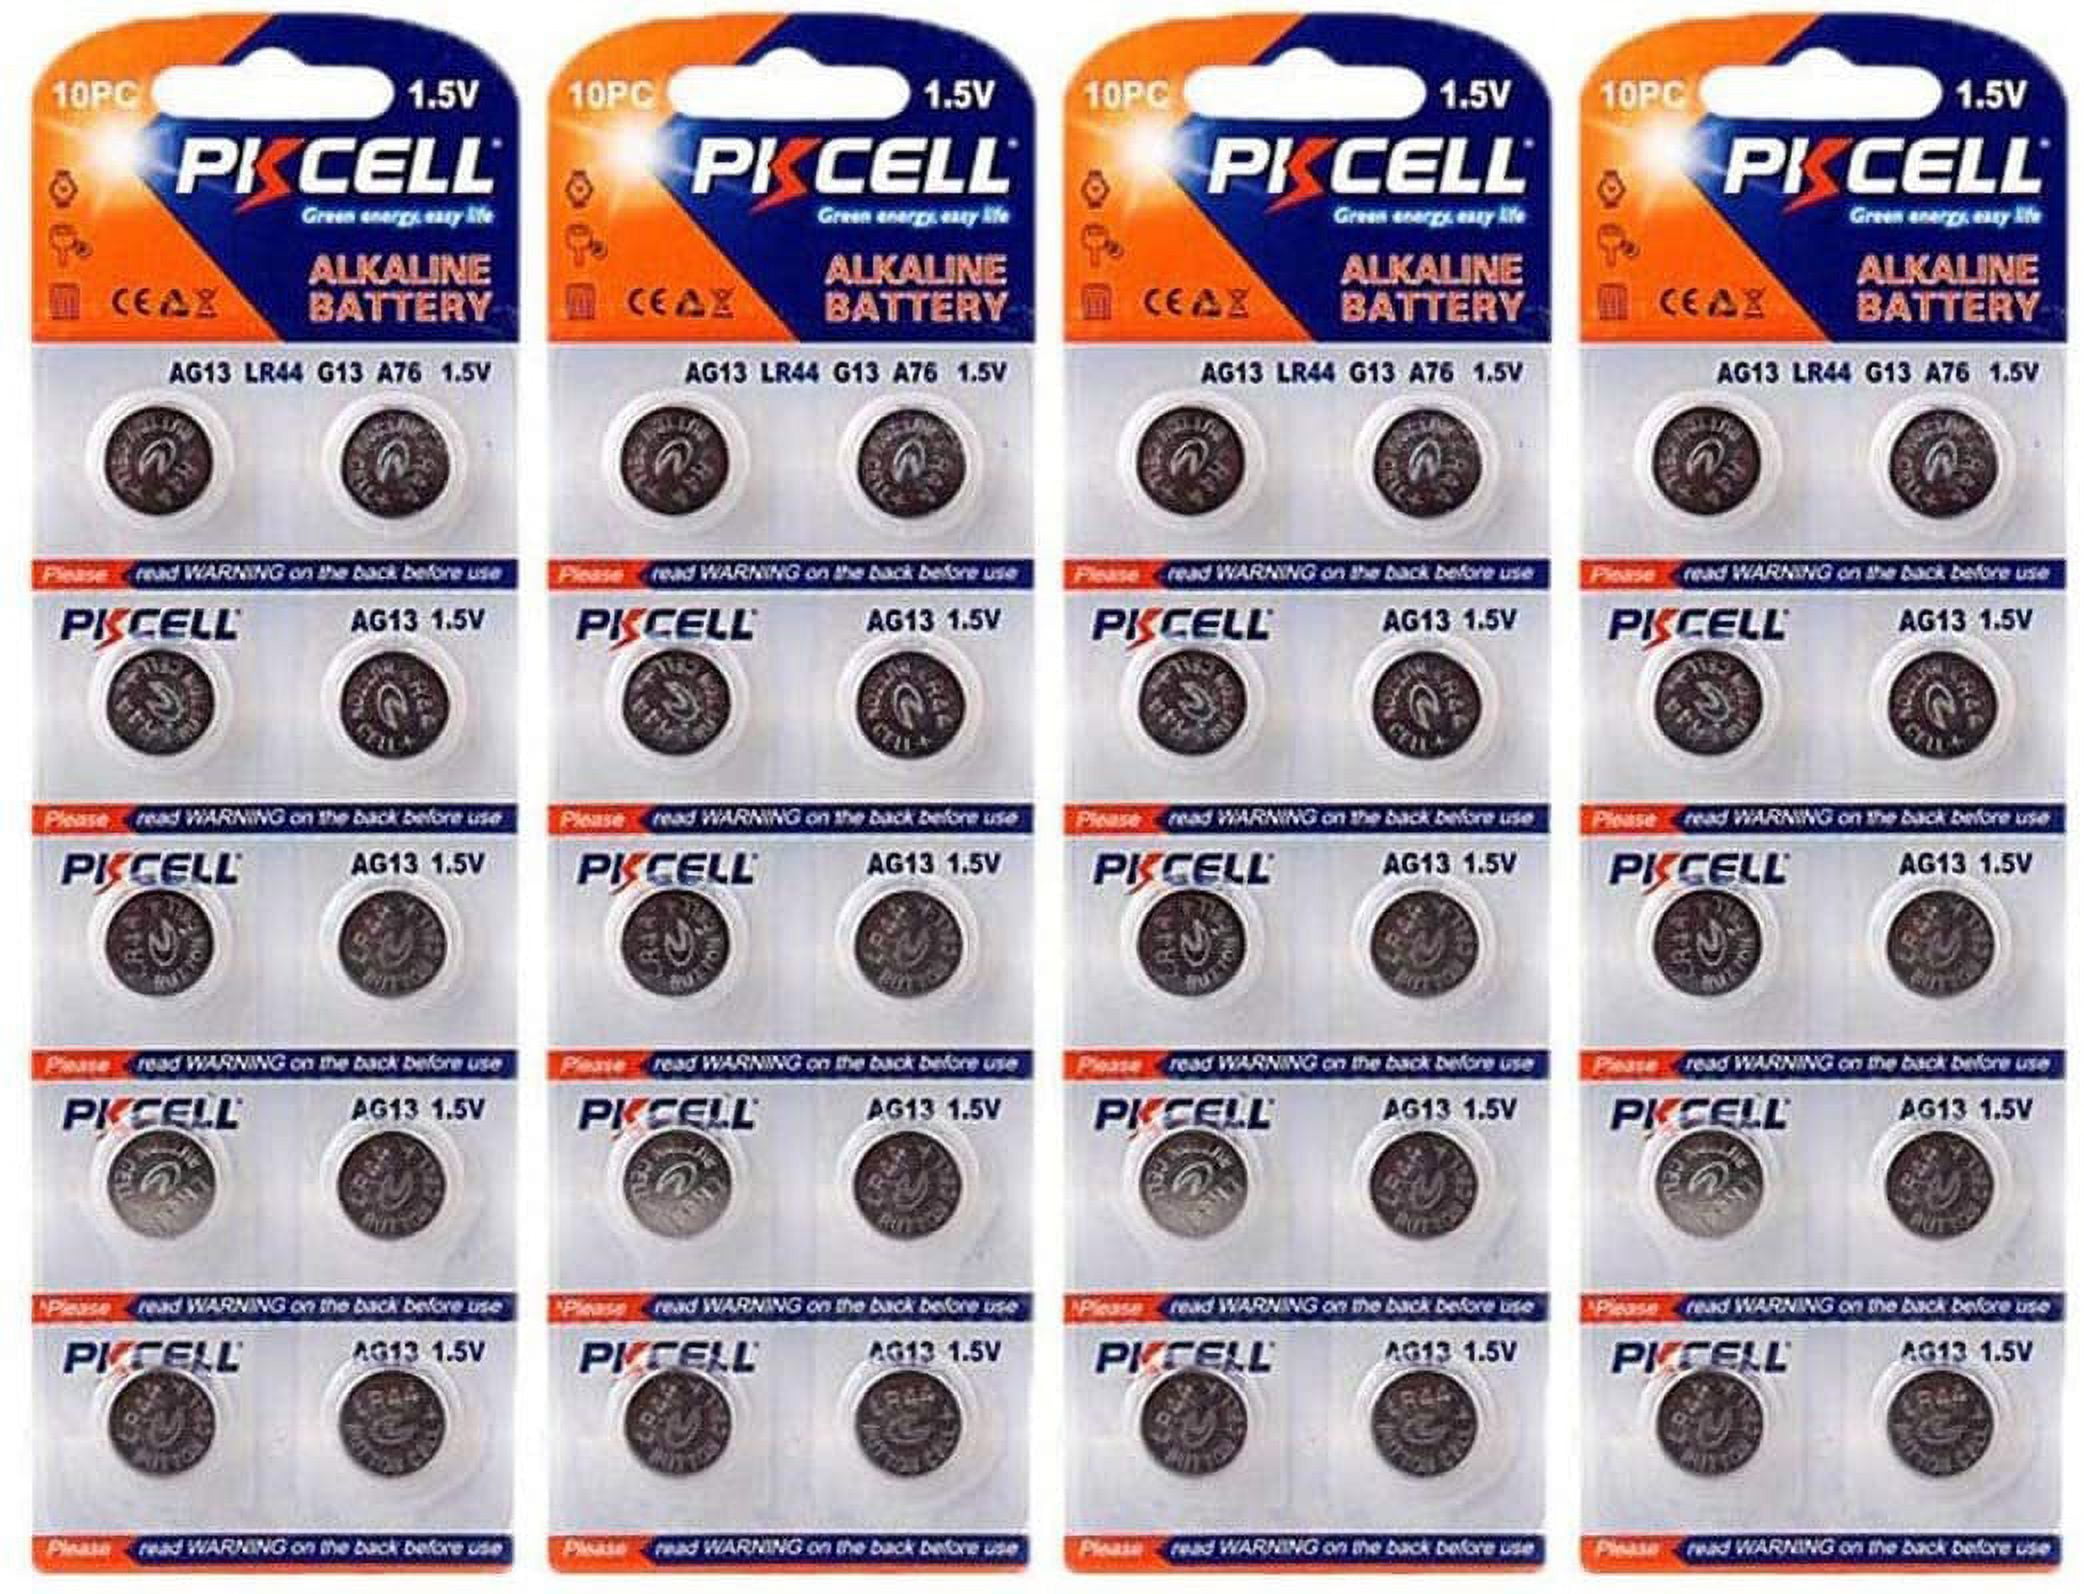 Button Cell Battery Equivalents to CR44, G13, A-76, and more